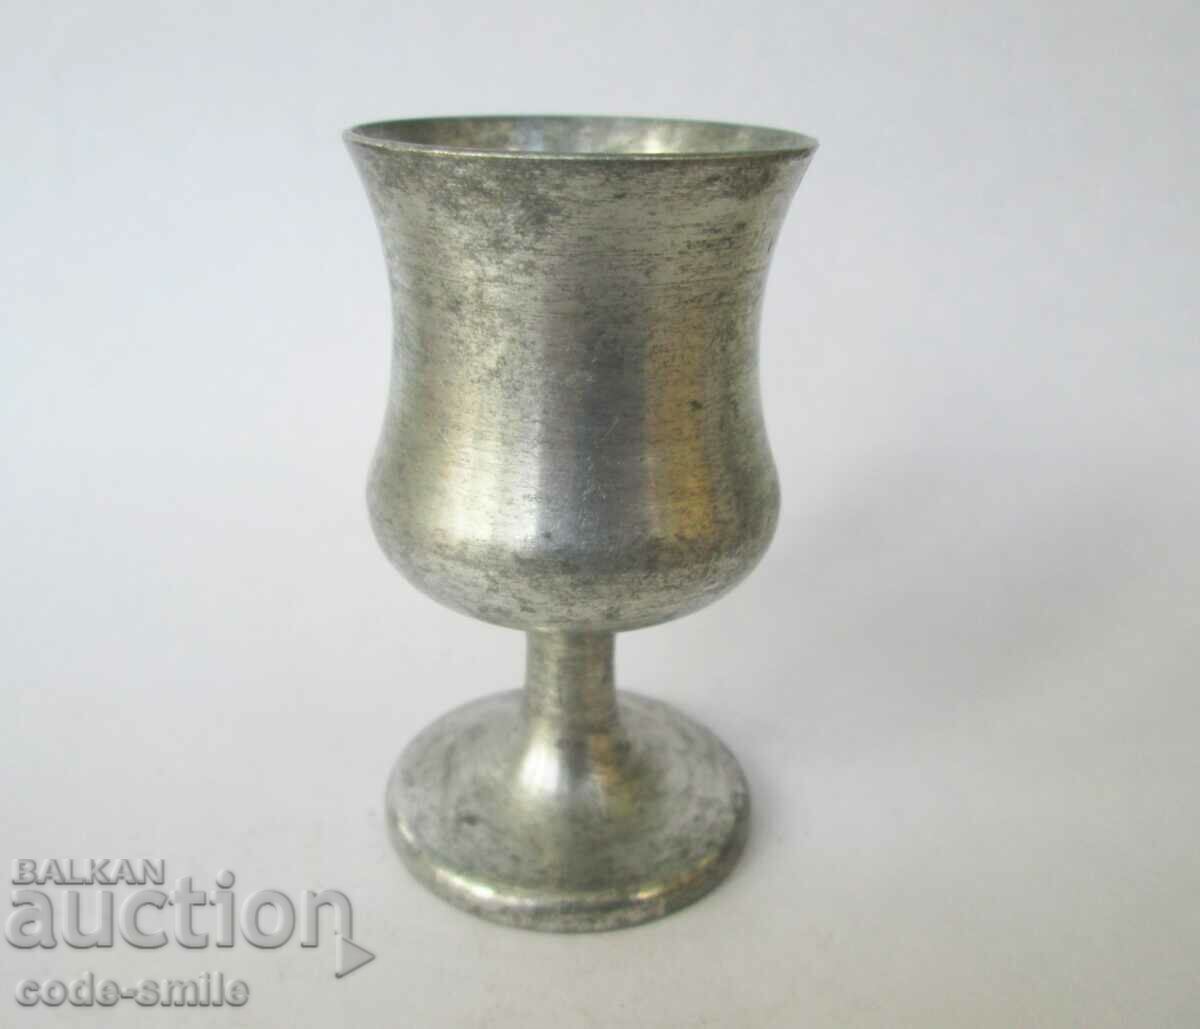 Old cup soldier trench art military art